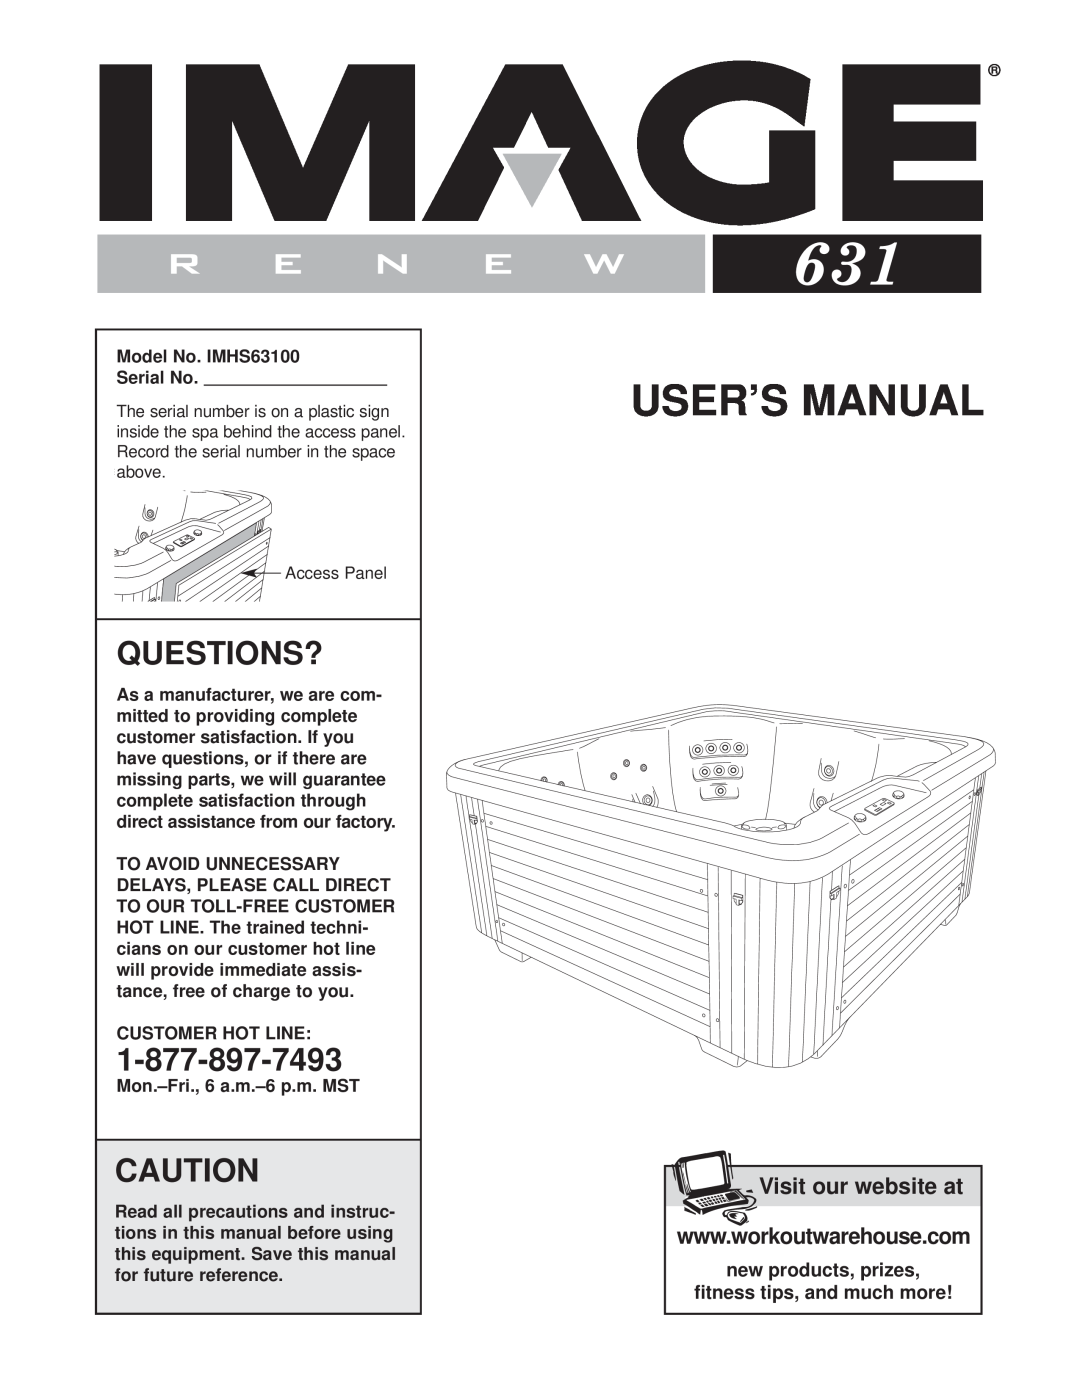 Image IMHS63100 user manual Questions?, User’S Manual, Visit our website at 